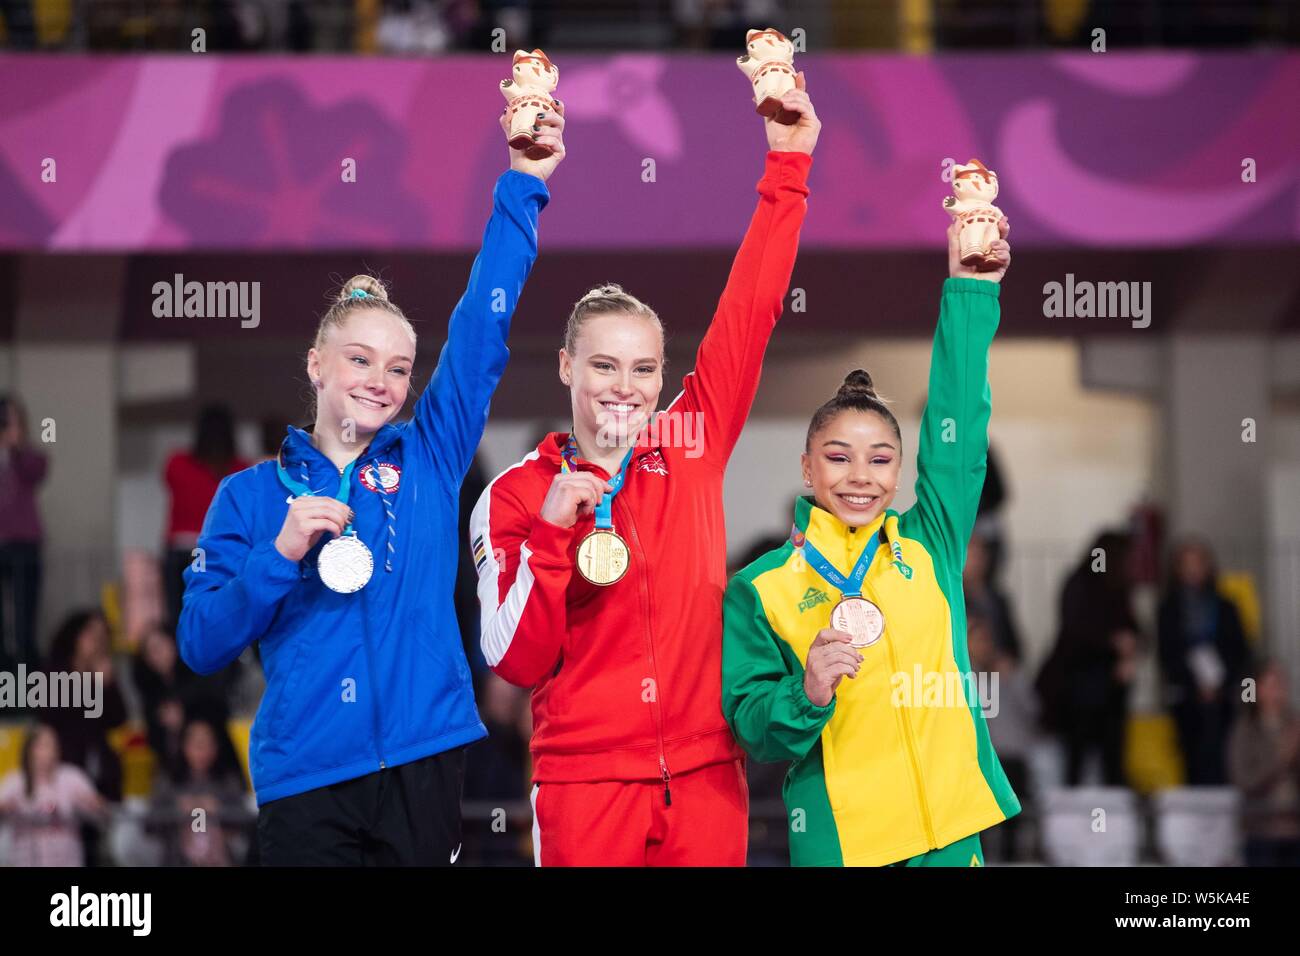 Lima, Peru. 29th July, 2019. Gold medalist Ellie Black of Canada is flanked by silver medalist Riley McCusker of United States and bronze medal winner Flavia Saraiva of Brazil saluting the crowd from the podium at the Pan American Games Artistic Gymnastics Women's All Around final at Polideportivo Villa el Salvador in Lima, Peru. Daniel Lea/CSM/Alamy Live News Stock Photo